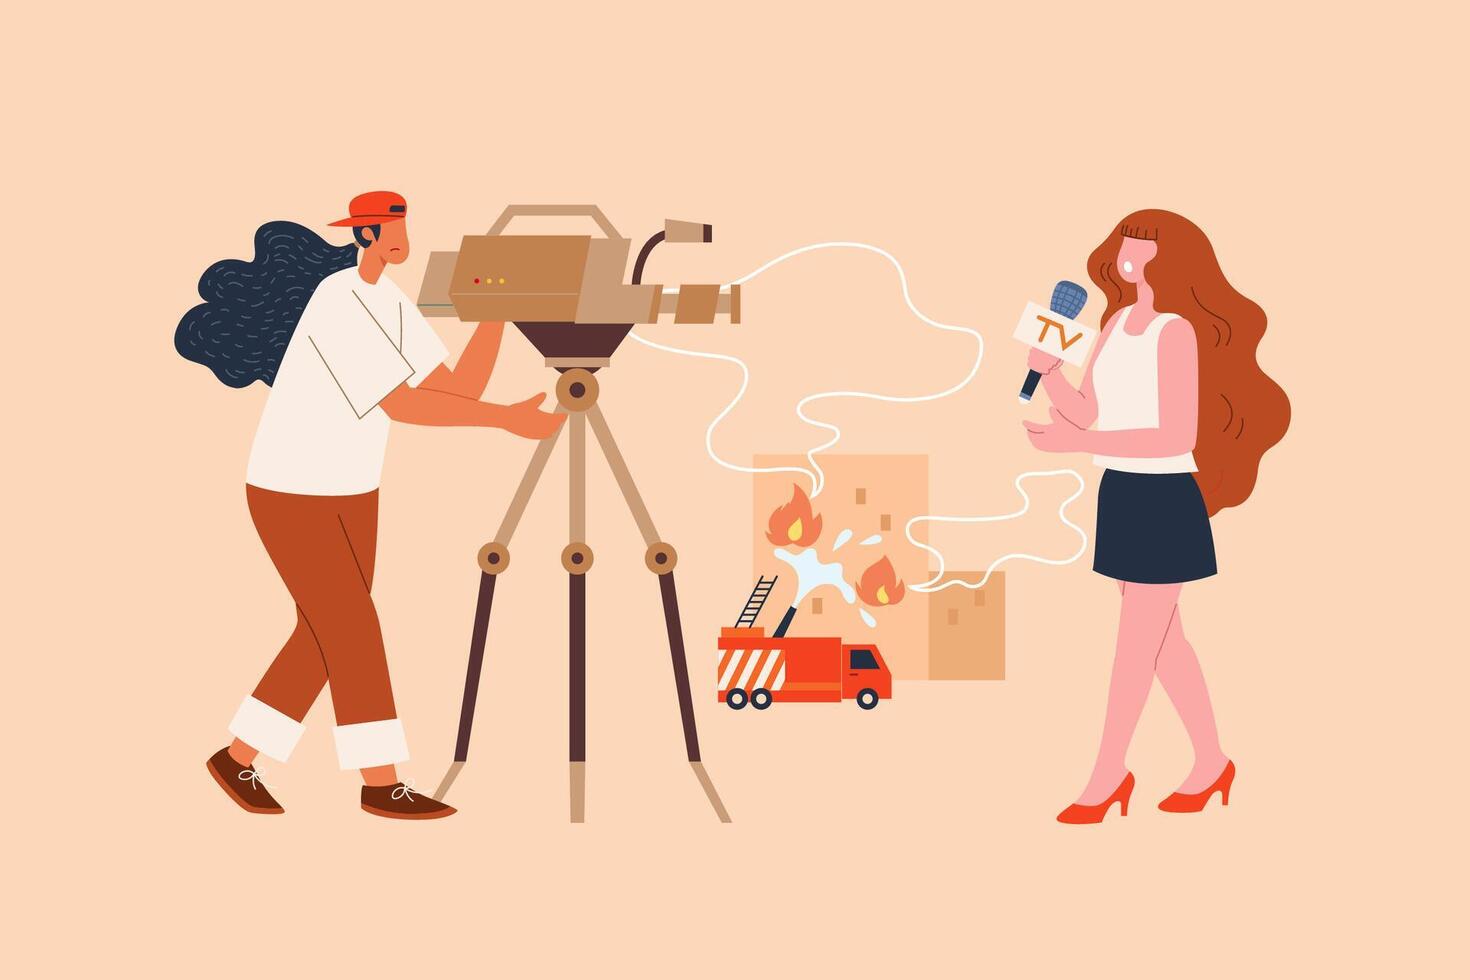 TV reporter reporting house on fire. Flat style illustration of a female TV reporter talking through microphone and professional cameraman live streaming a fire incidence vector